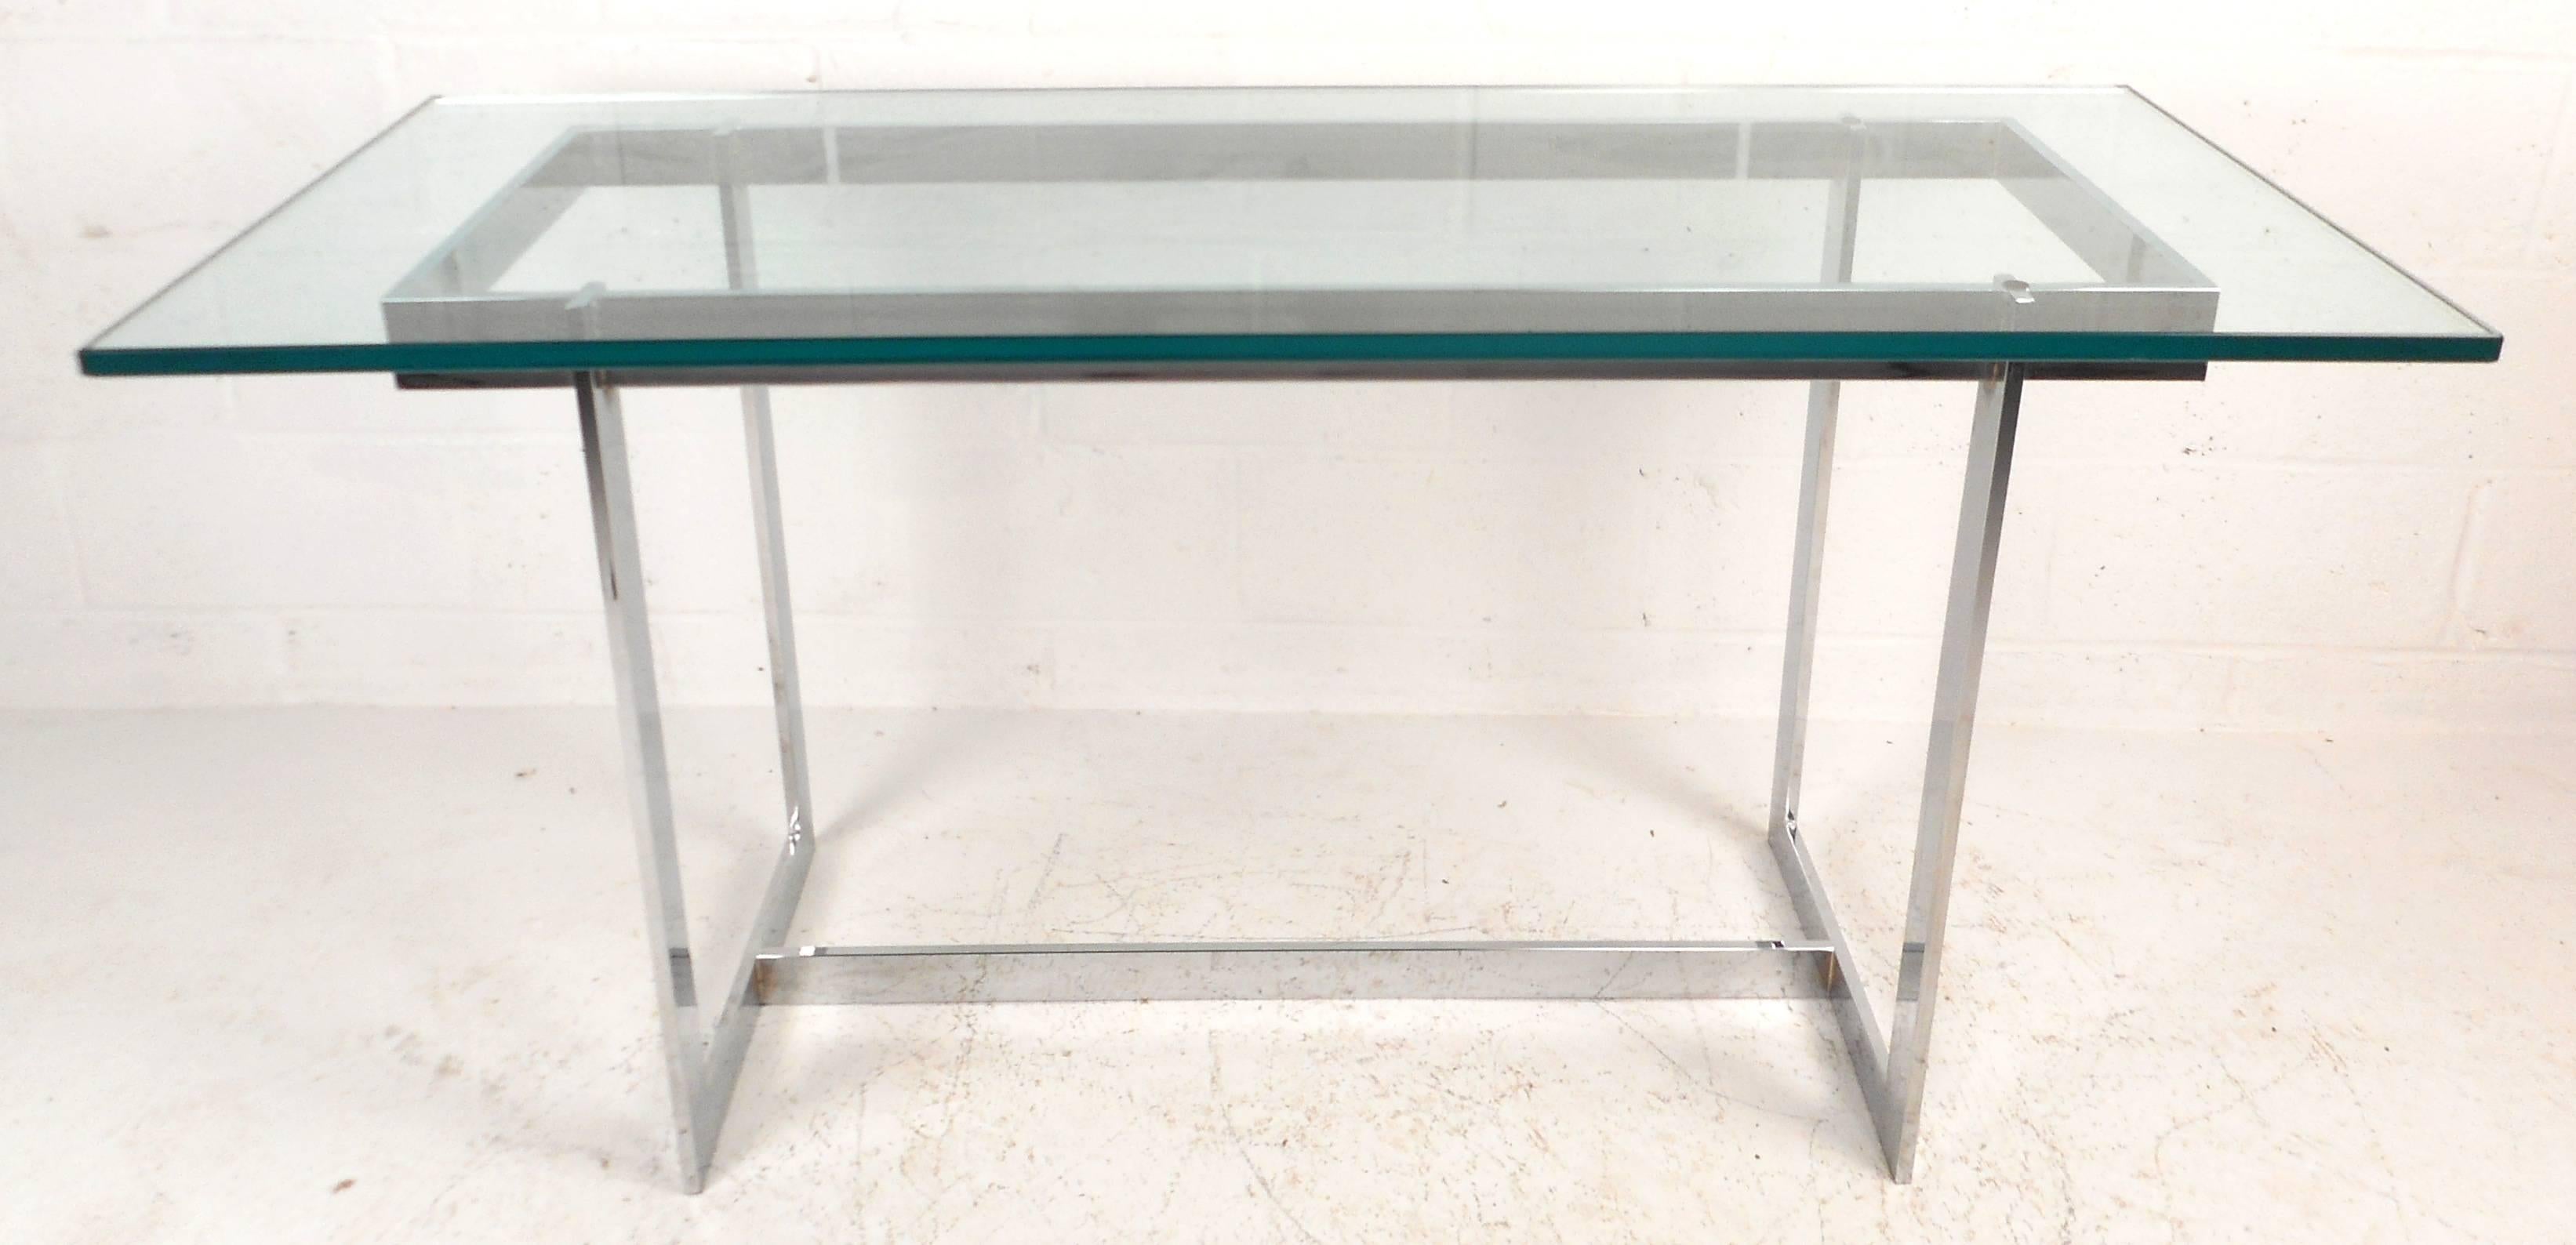 Stunning vintage modern console table features a heavy sculpted chrome frame and a 1